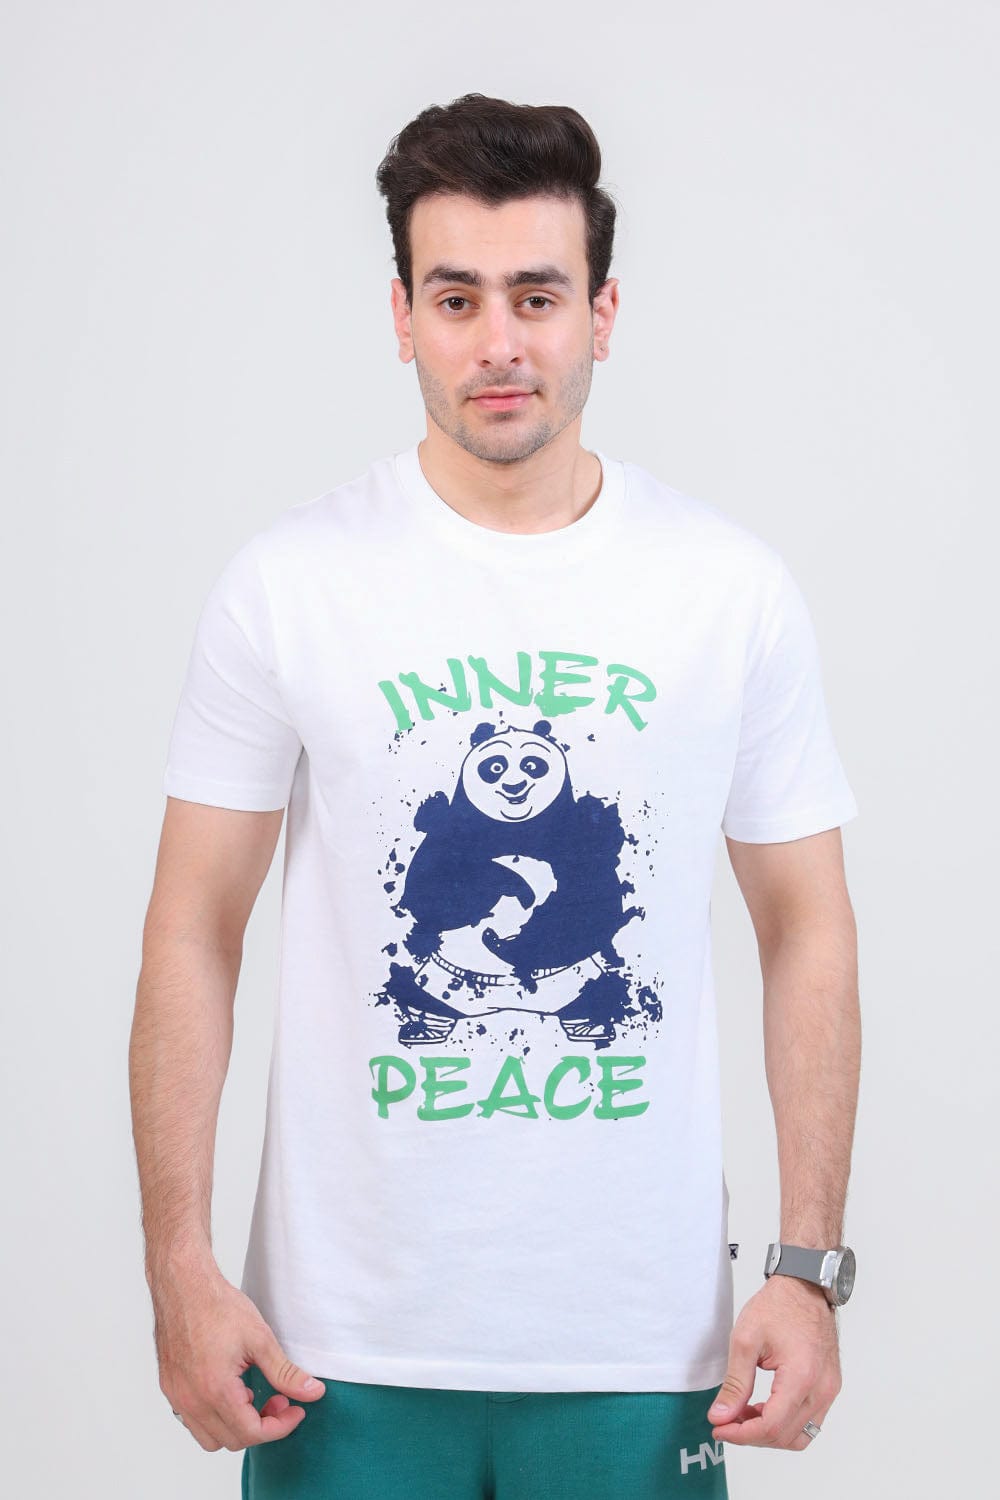 Hope Not Out by Shahid Afridi Men T-Shirt Kung Fu Panda Inner Peace Tee for Men